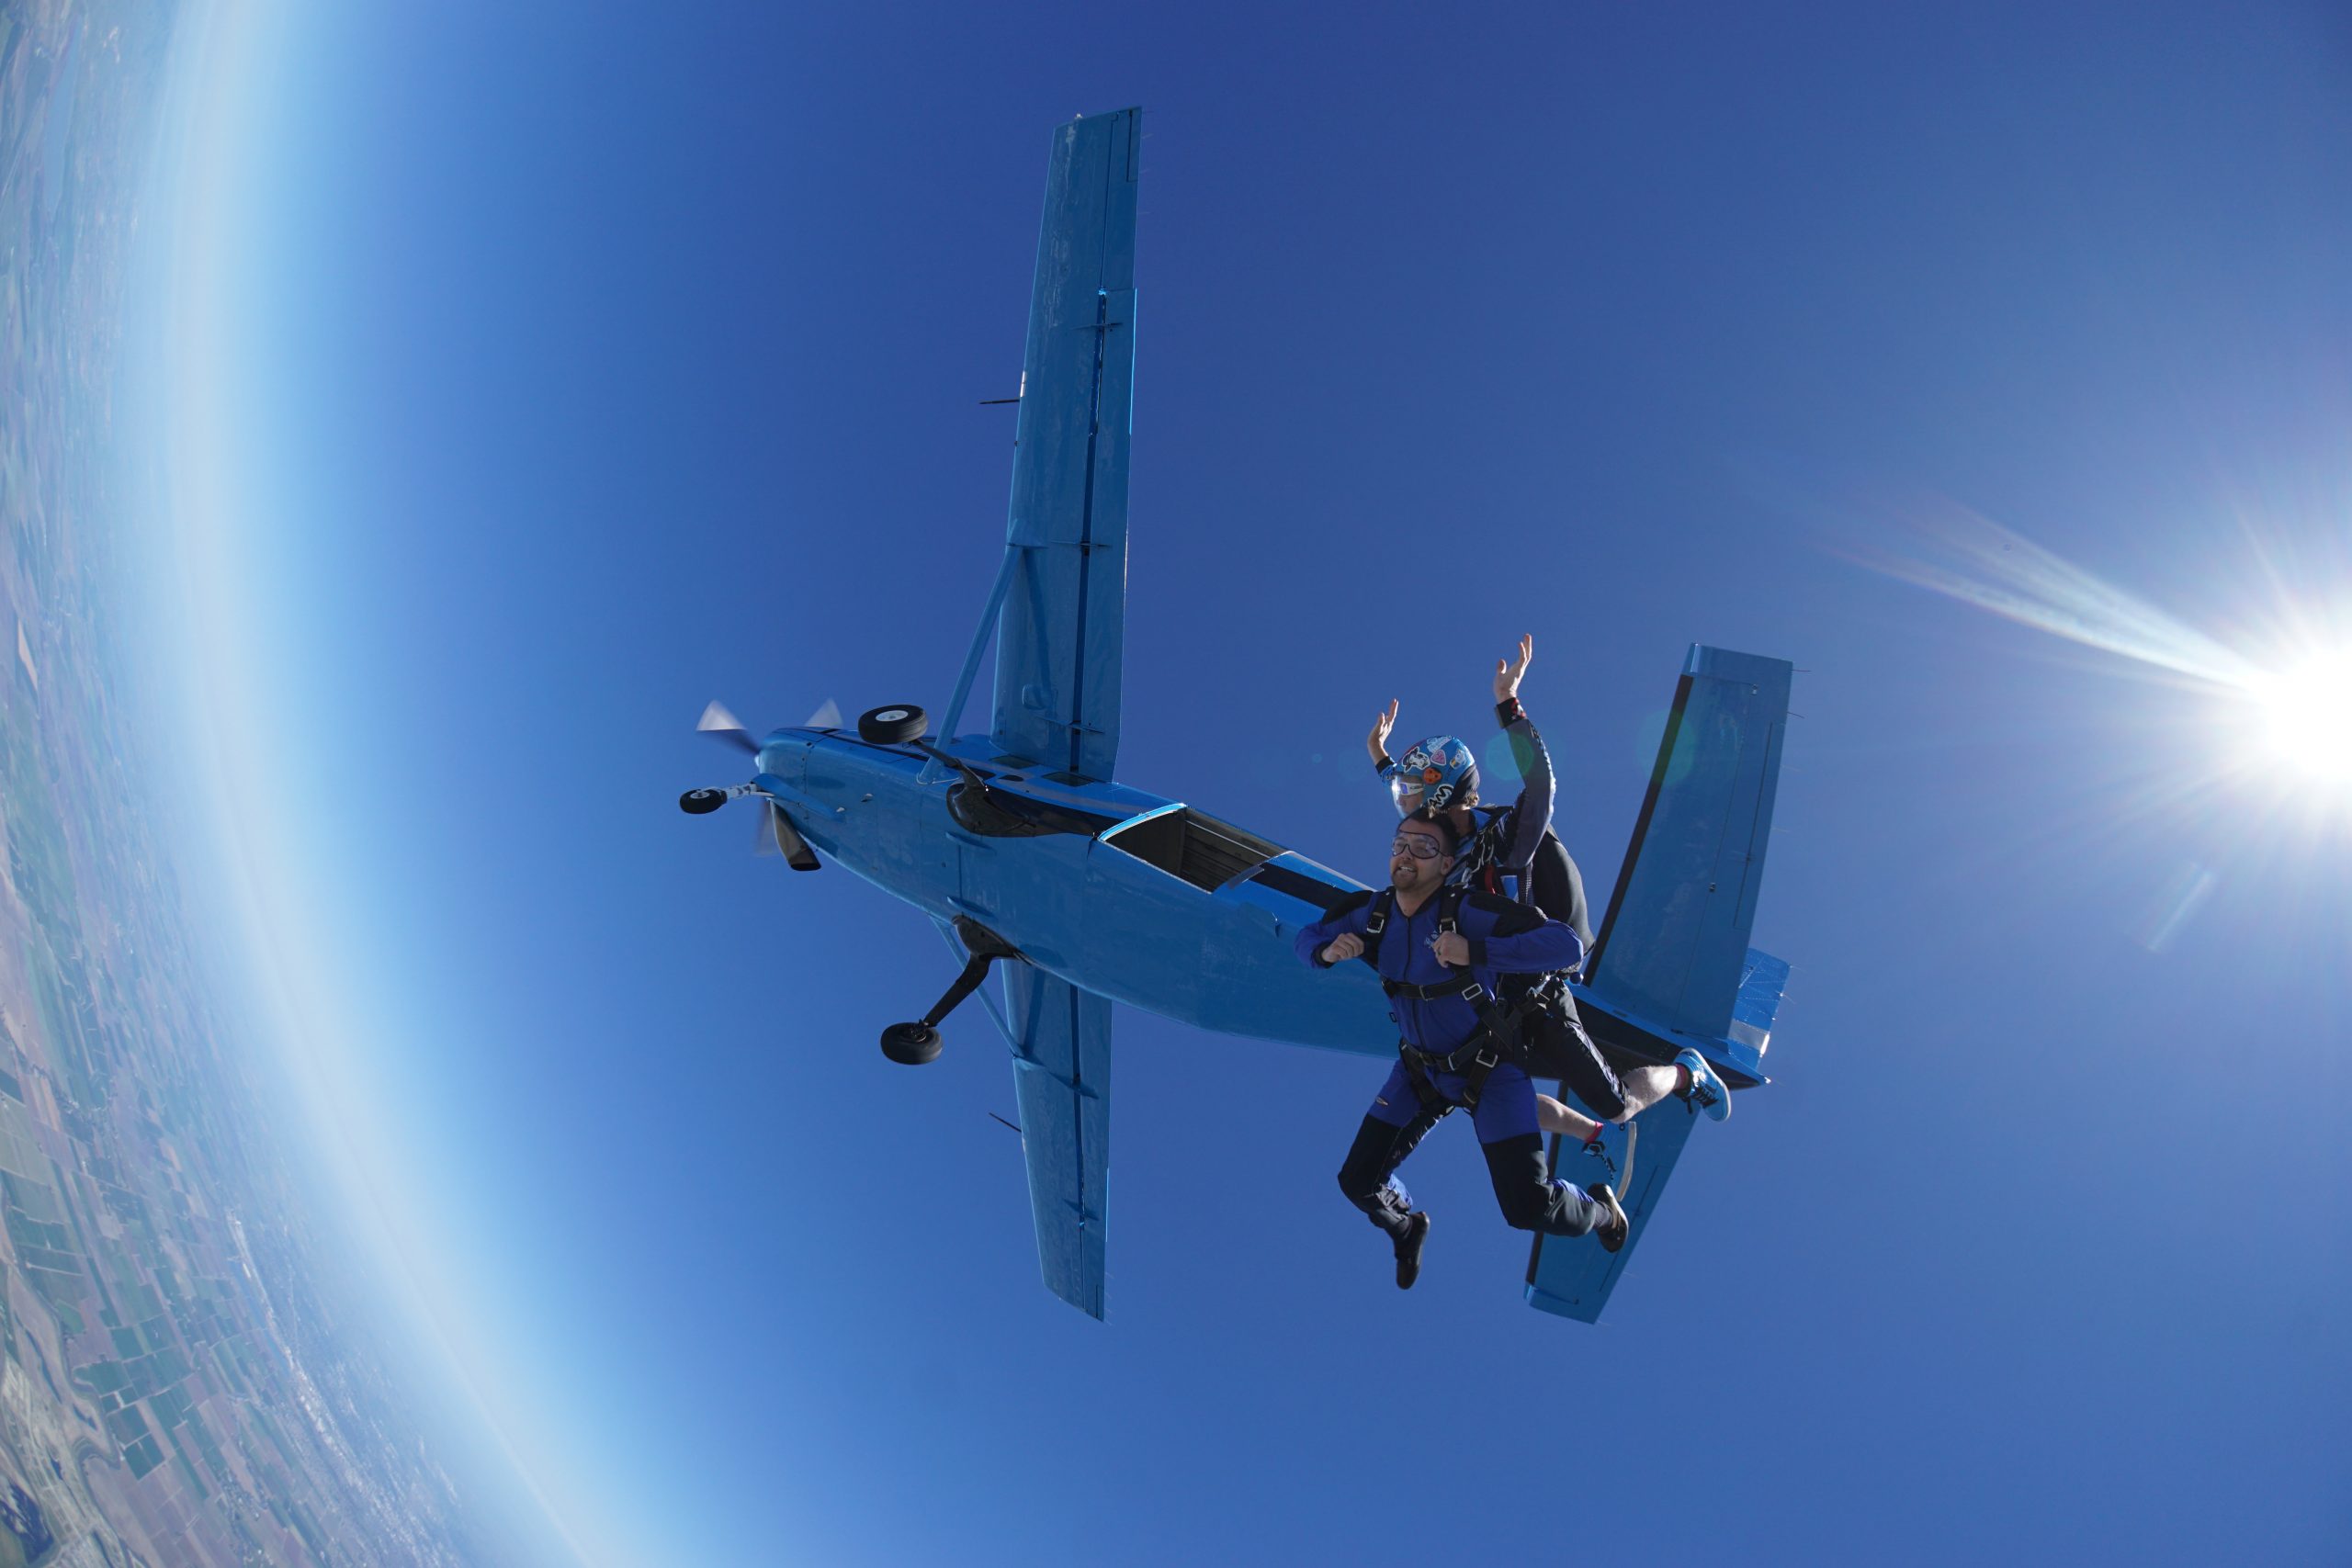 skydiving worth the risk